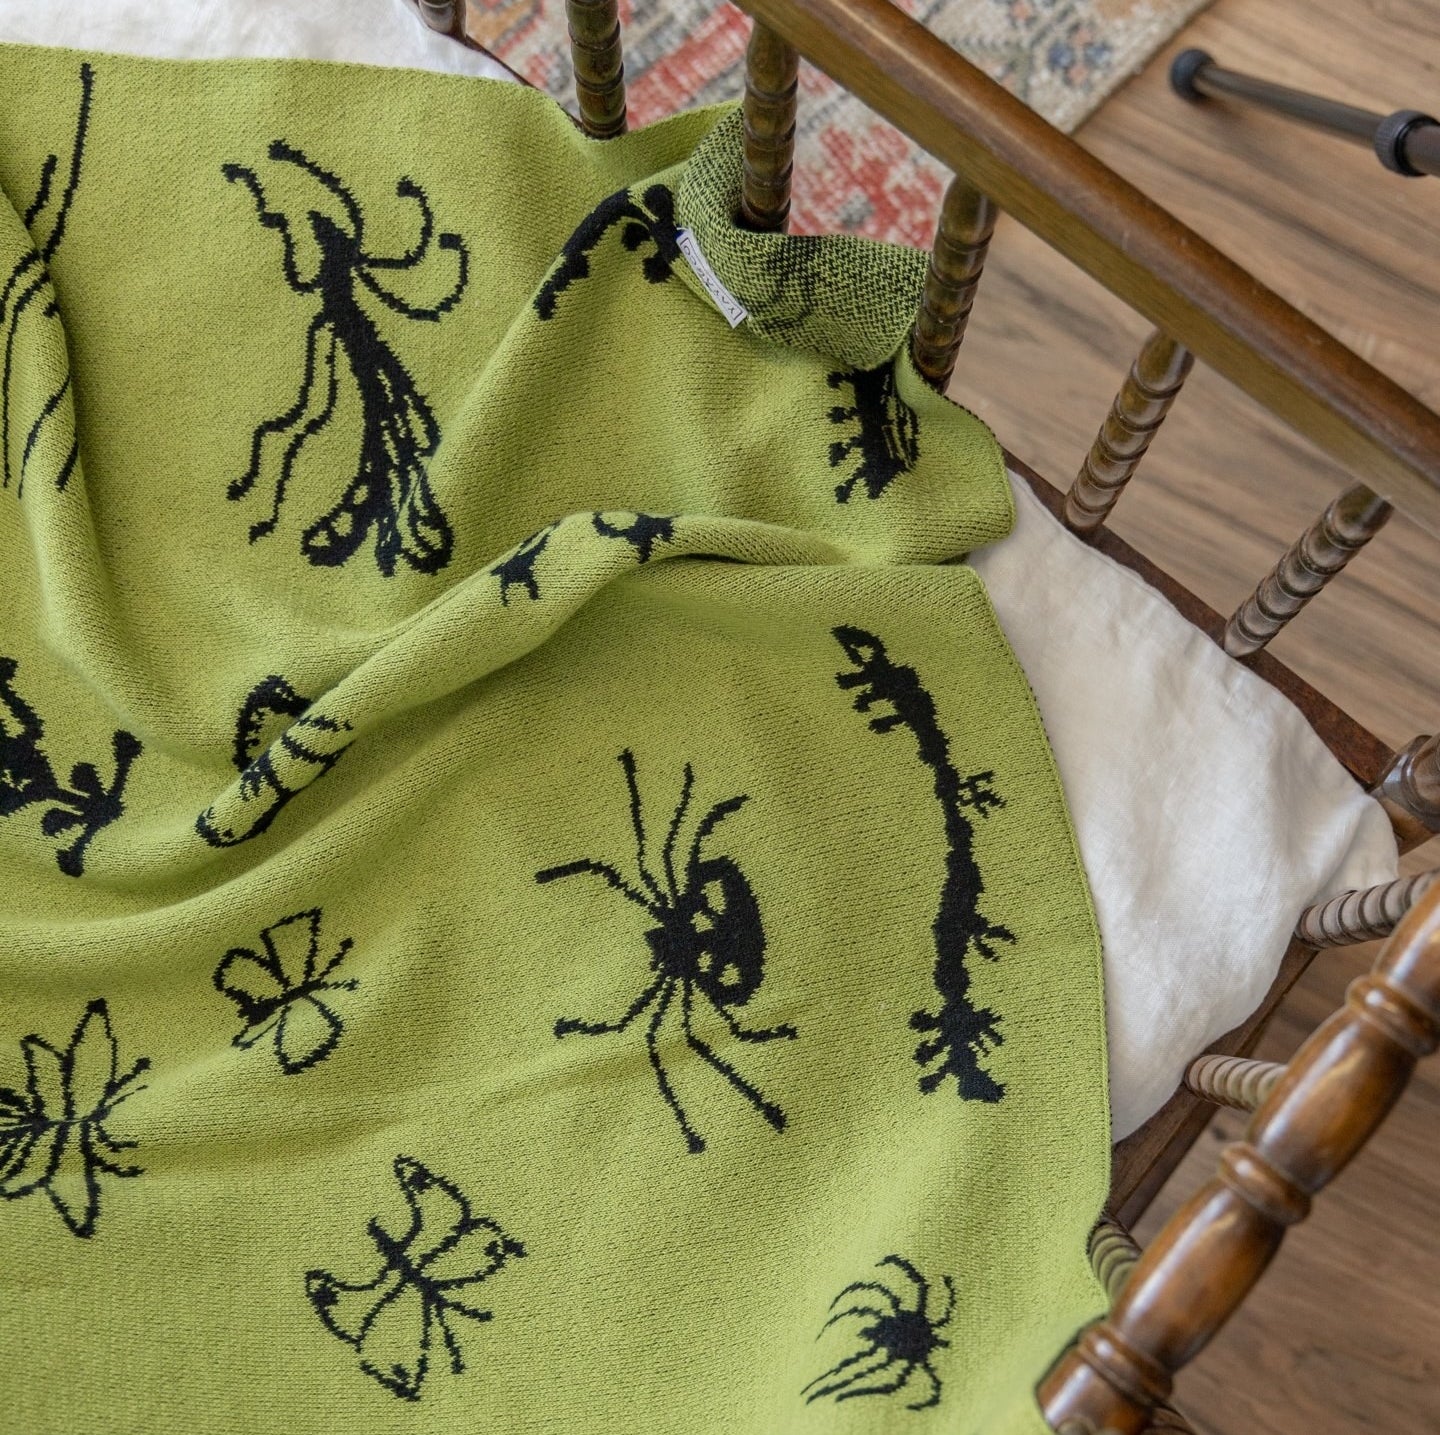 A lime green throw blanket with black bugs pattern